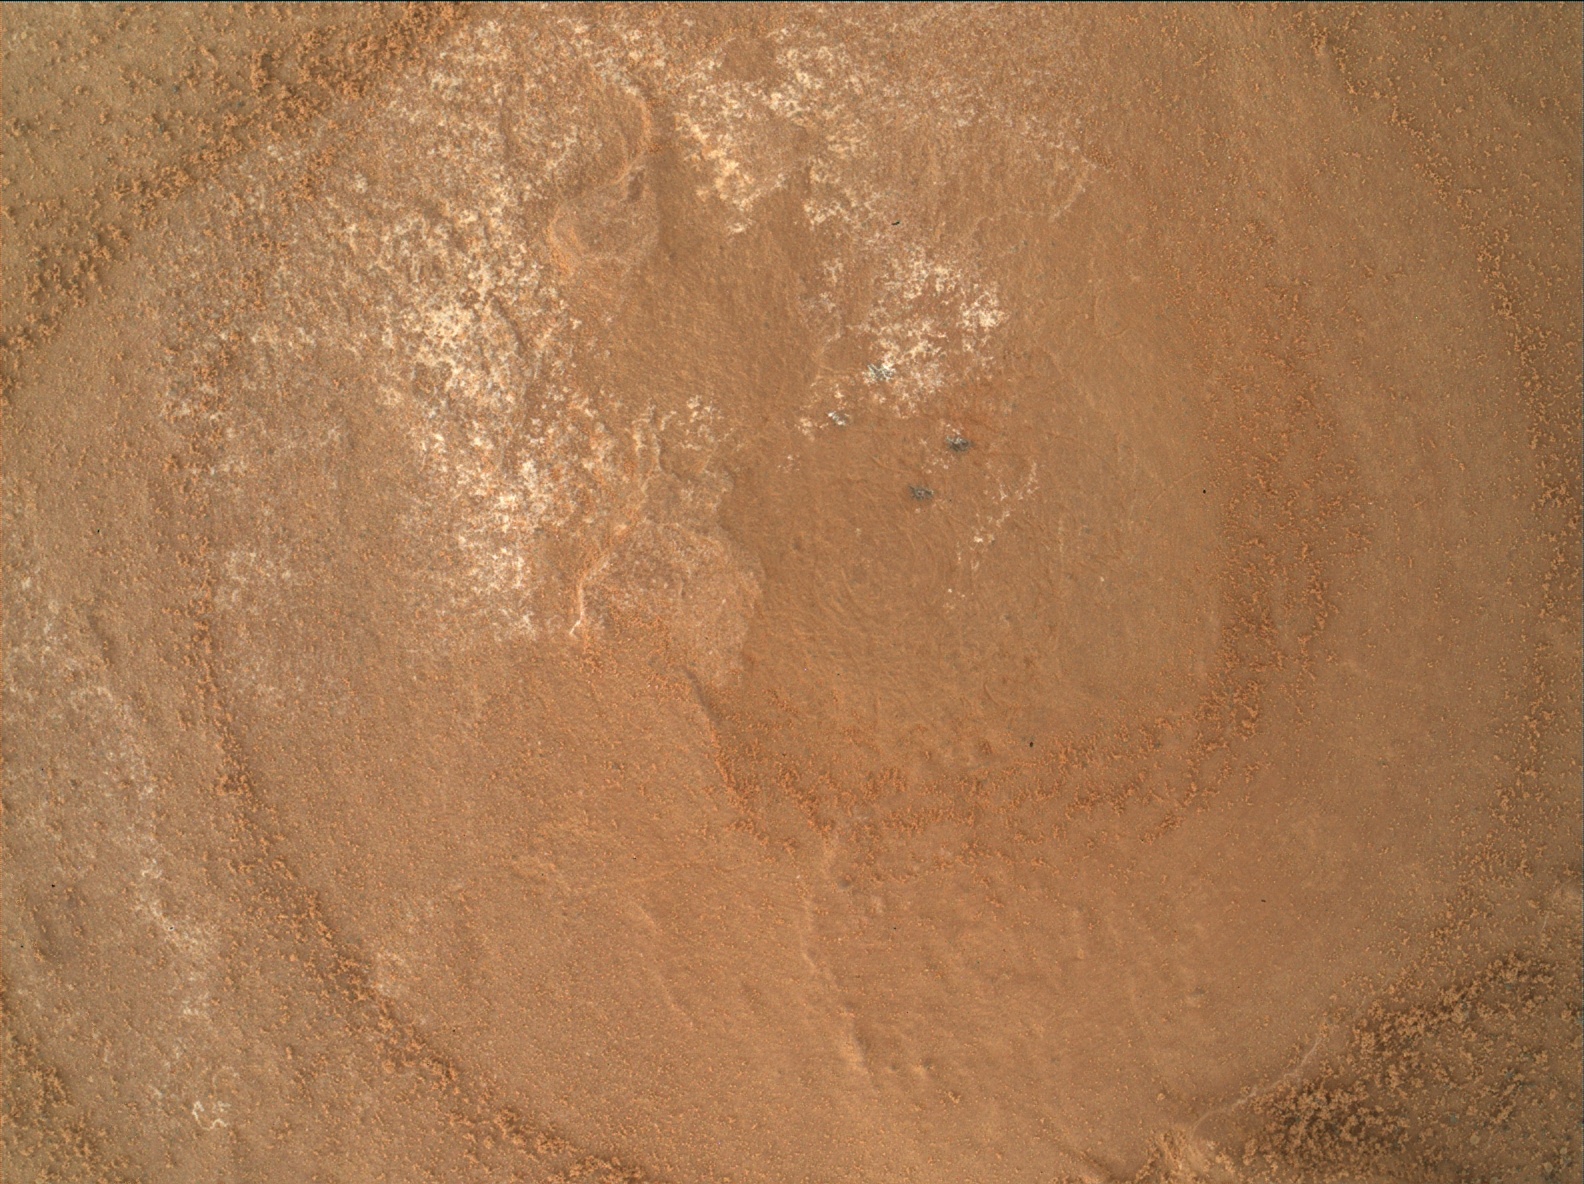 Nasa's Mars rover Curiosity acquired this image using its Mars Hand Lens Imager (MAHLI) on Sol 1807